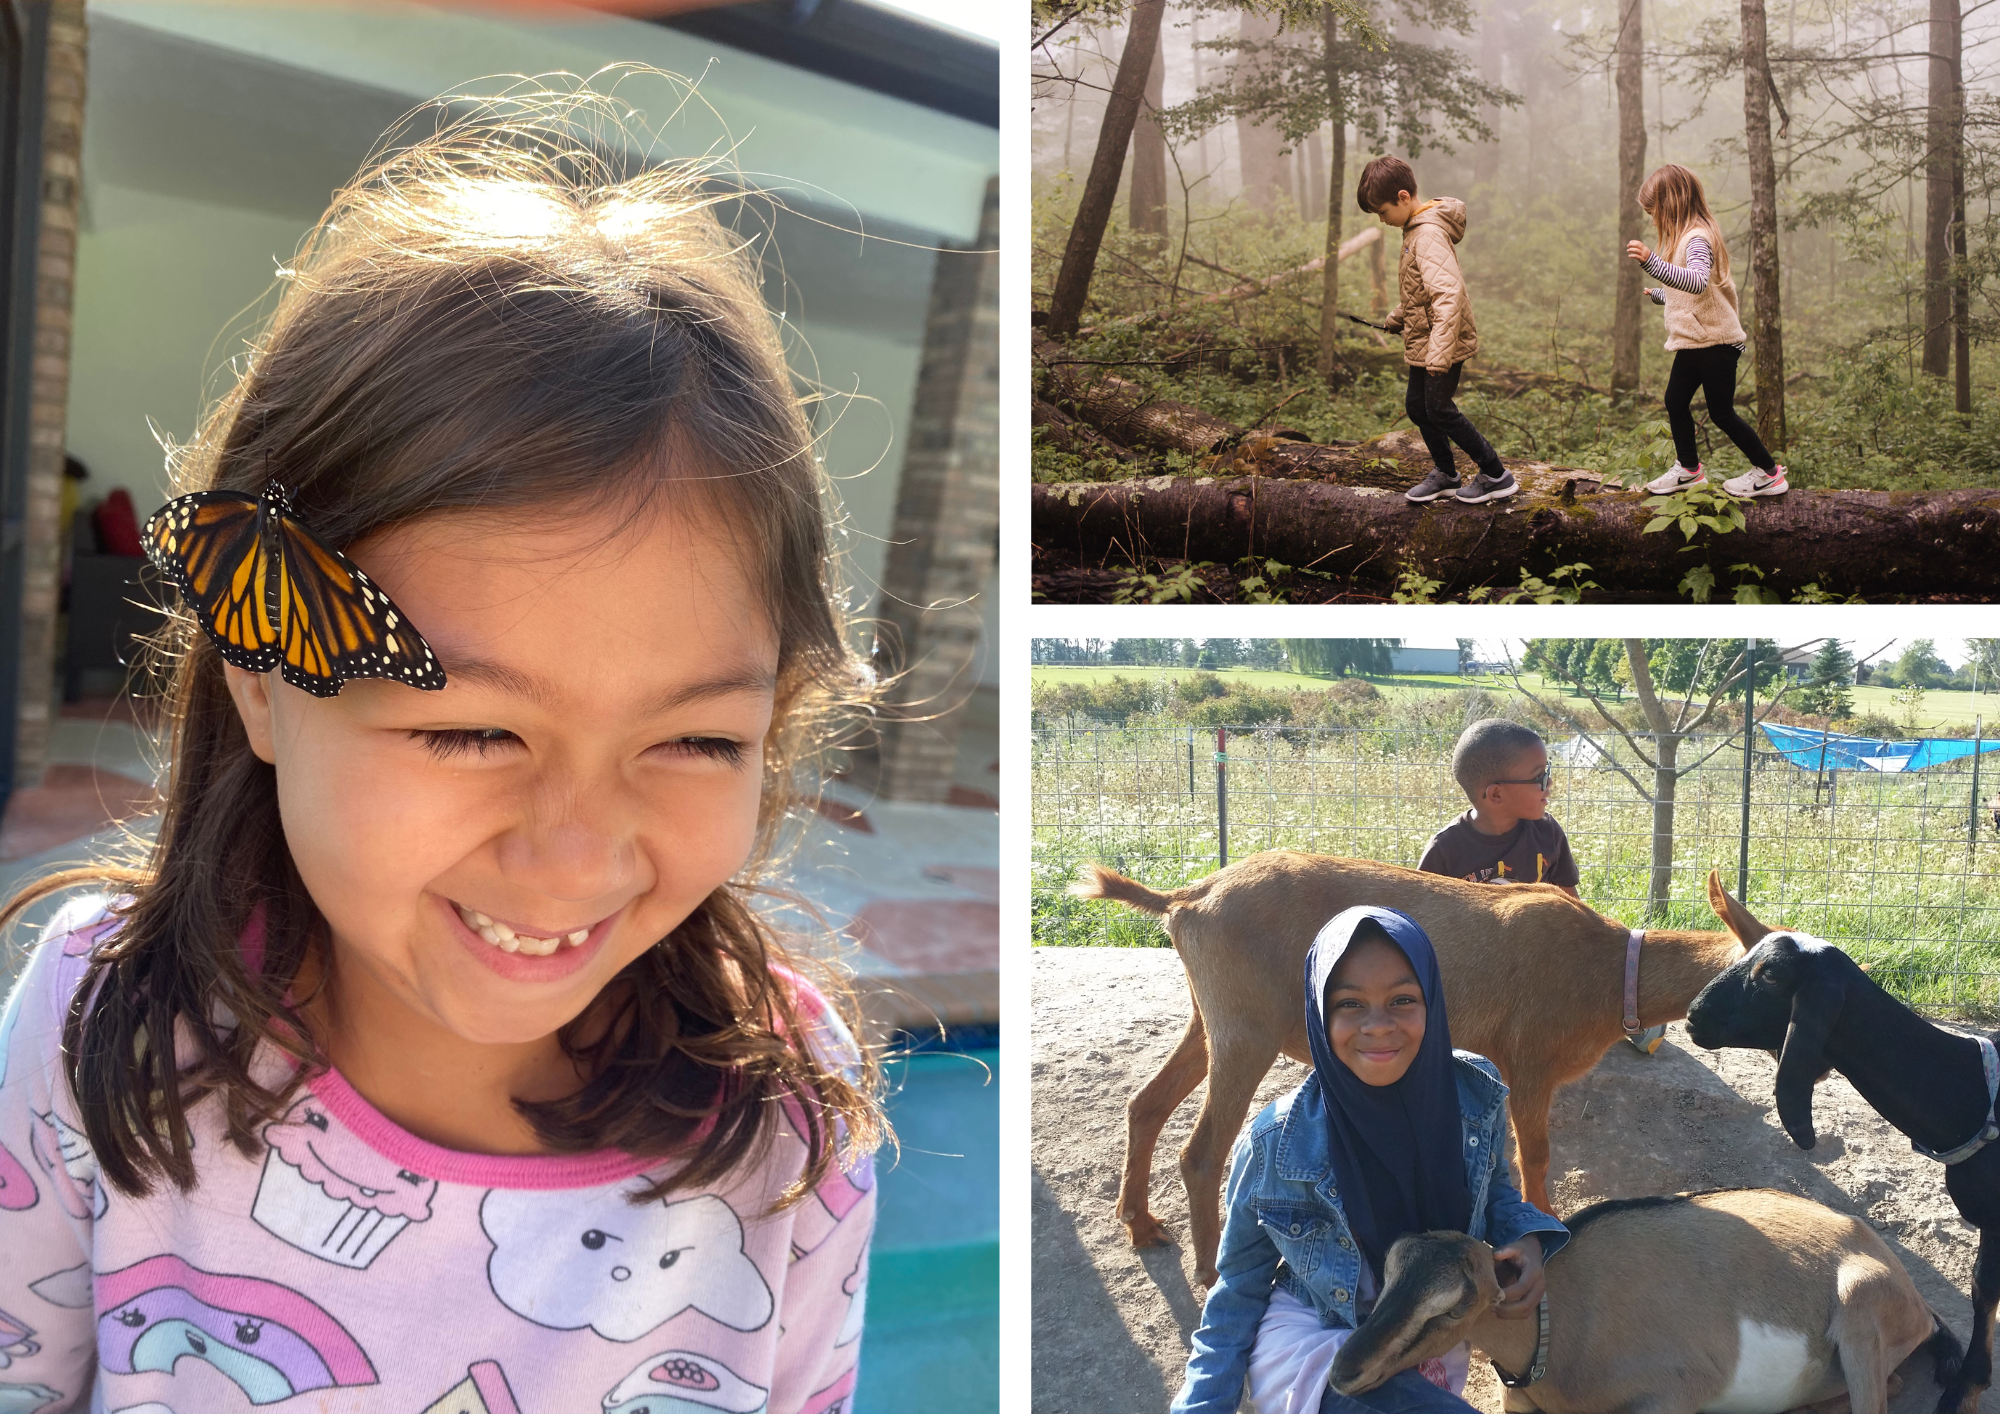 A girl smiling with a butterfly on her face; two children running across a log; a girl smiling while petting a goat